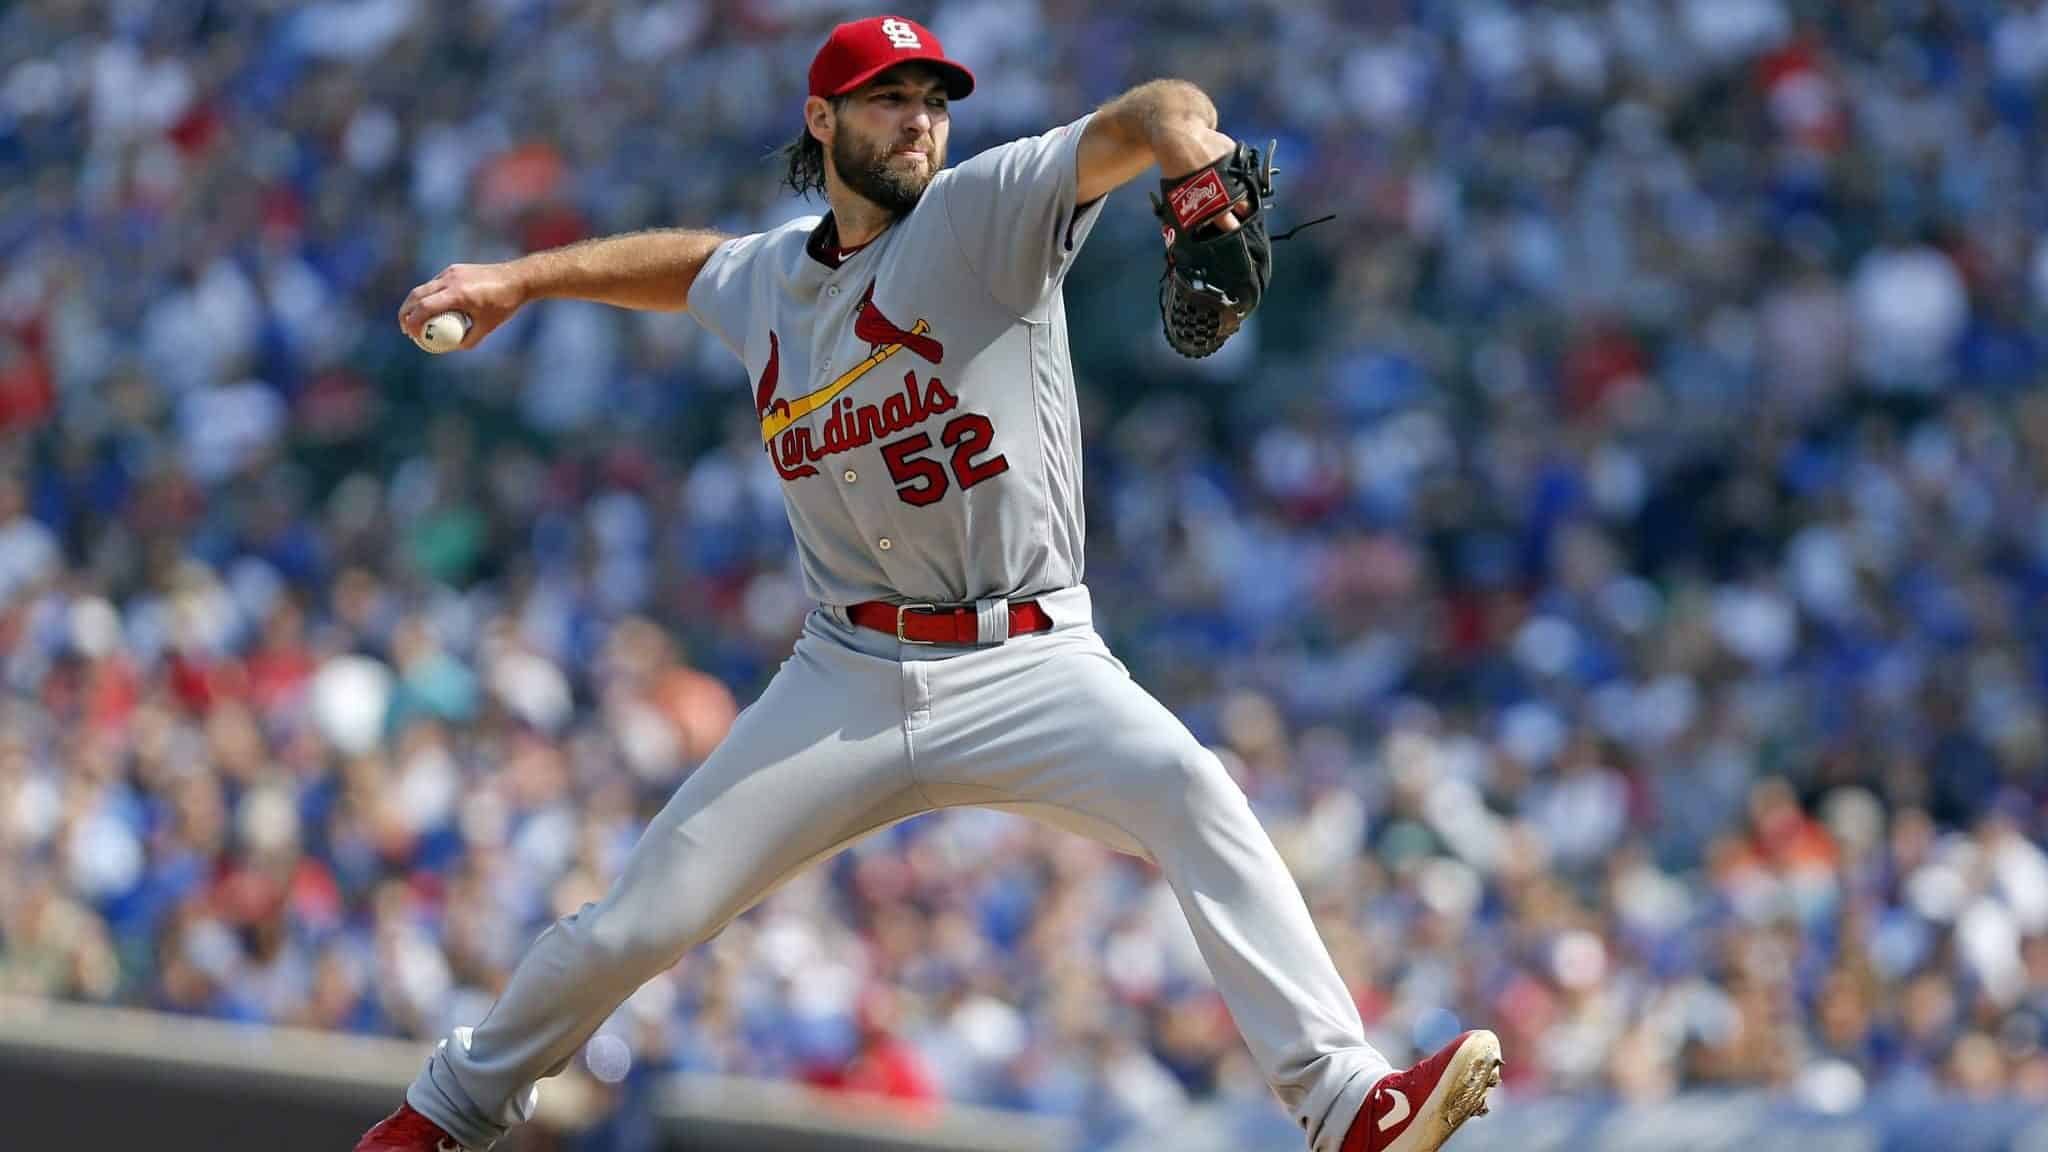 CHICAGO, ILLINOIS - SEPTEMBER 20: Michael Wacha #52 of the St. Louis Cardinals pitches in the second inning during the game against the Chicago Cubs at Wrigley Field on September 20, 2019 in Chicago, Illinois.